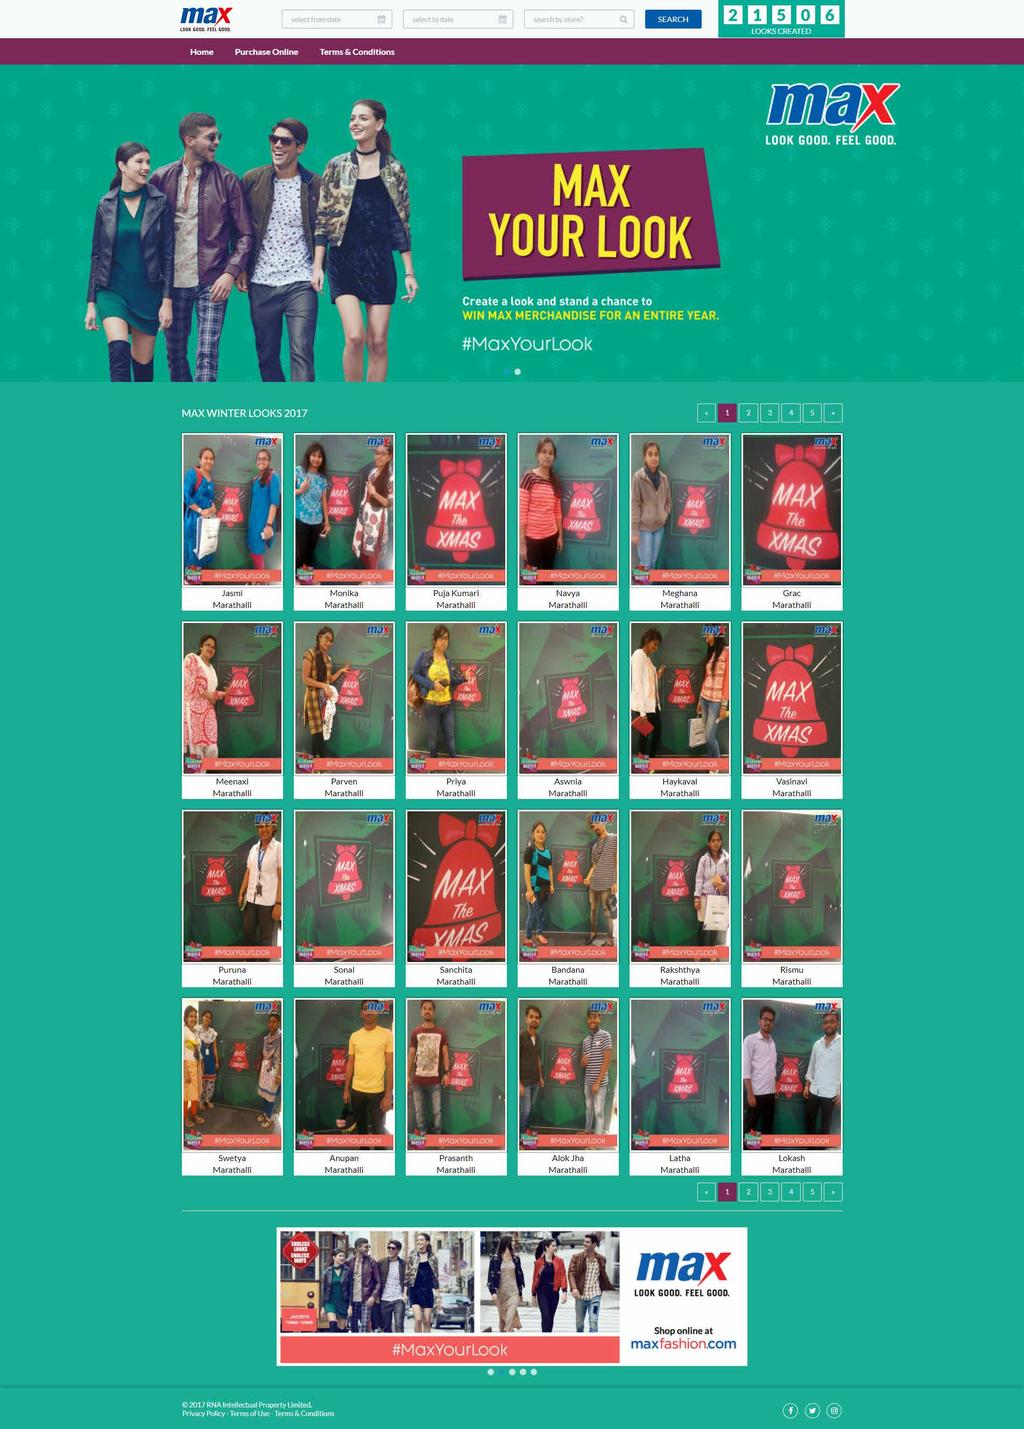 OUR FOR WEB MaxYourLook MaxYourLook marketing campaign conducted by maxfashions at their 180 stores around Pan India.